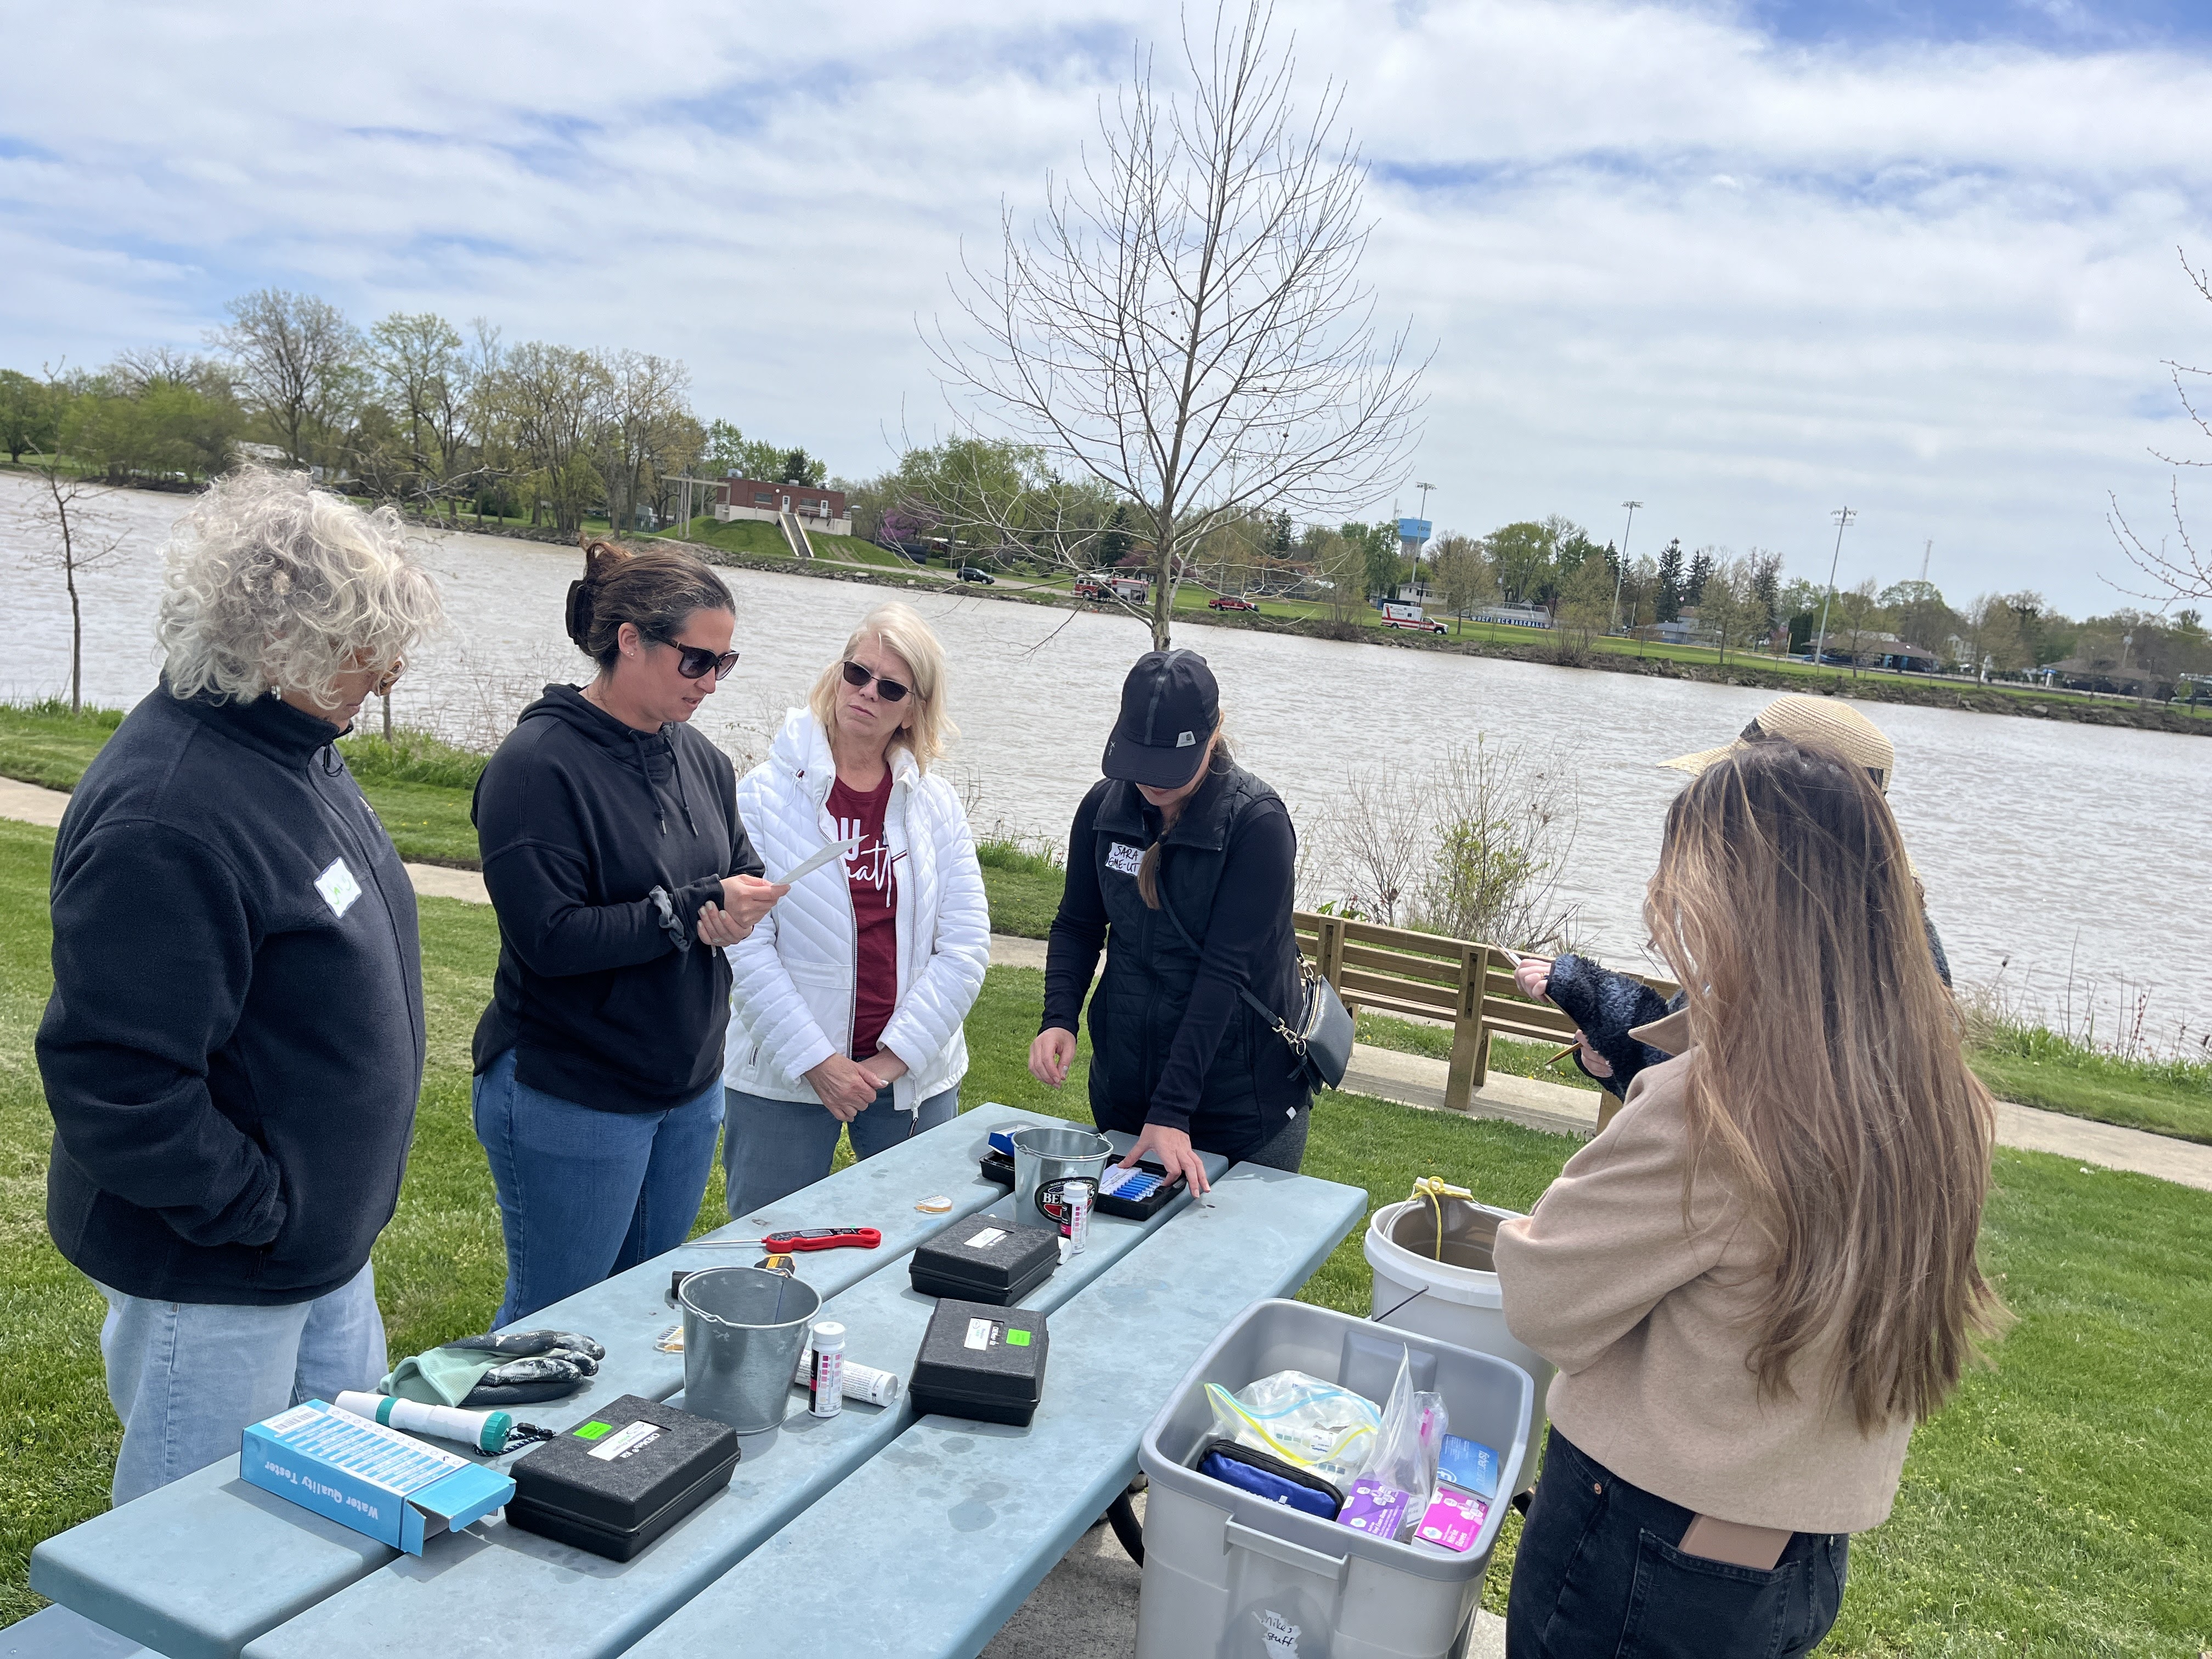 NARM participants prepare to study the Maumee River with various water quality testing kits